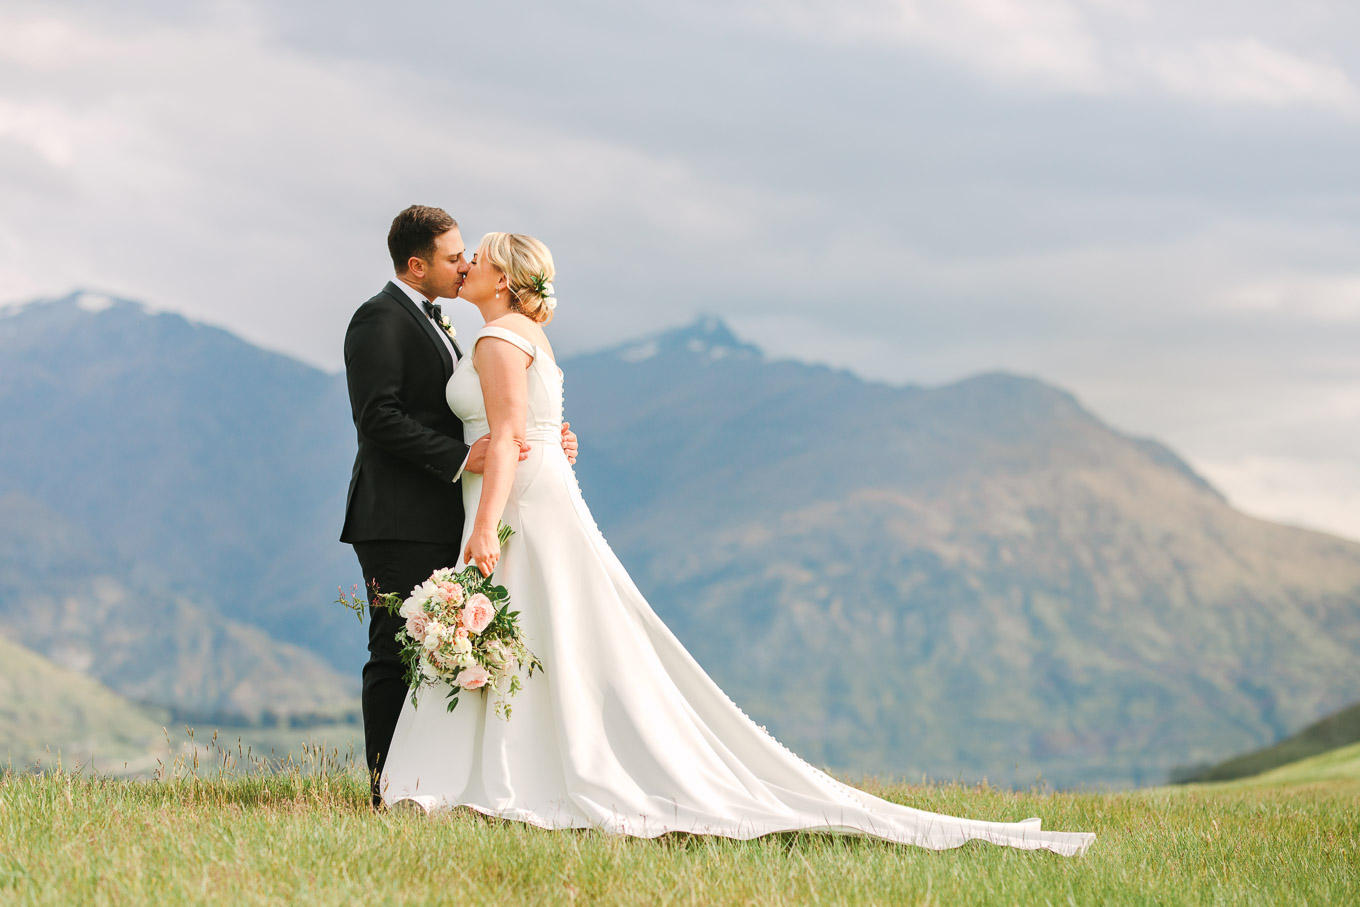 Wedding portrait on a hillside with Southern Alps in the background. Millbrook Resort Queenstown New Zealand wedding by Mary Costa Photography | www.marycostaweddings.com